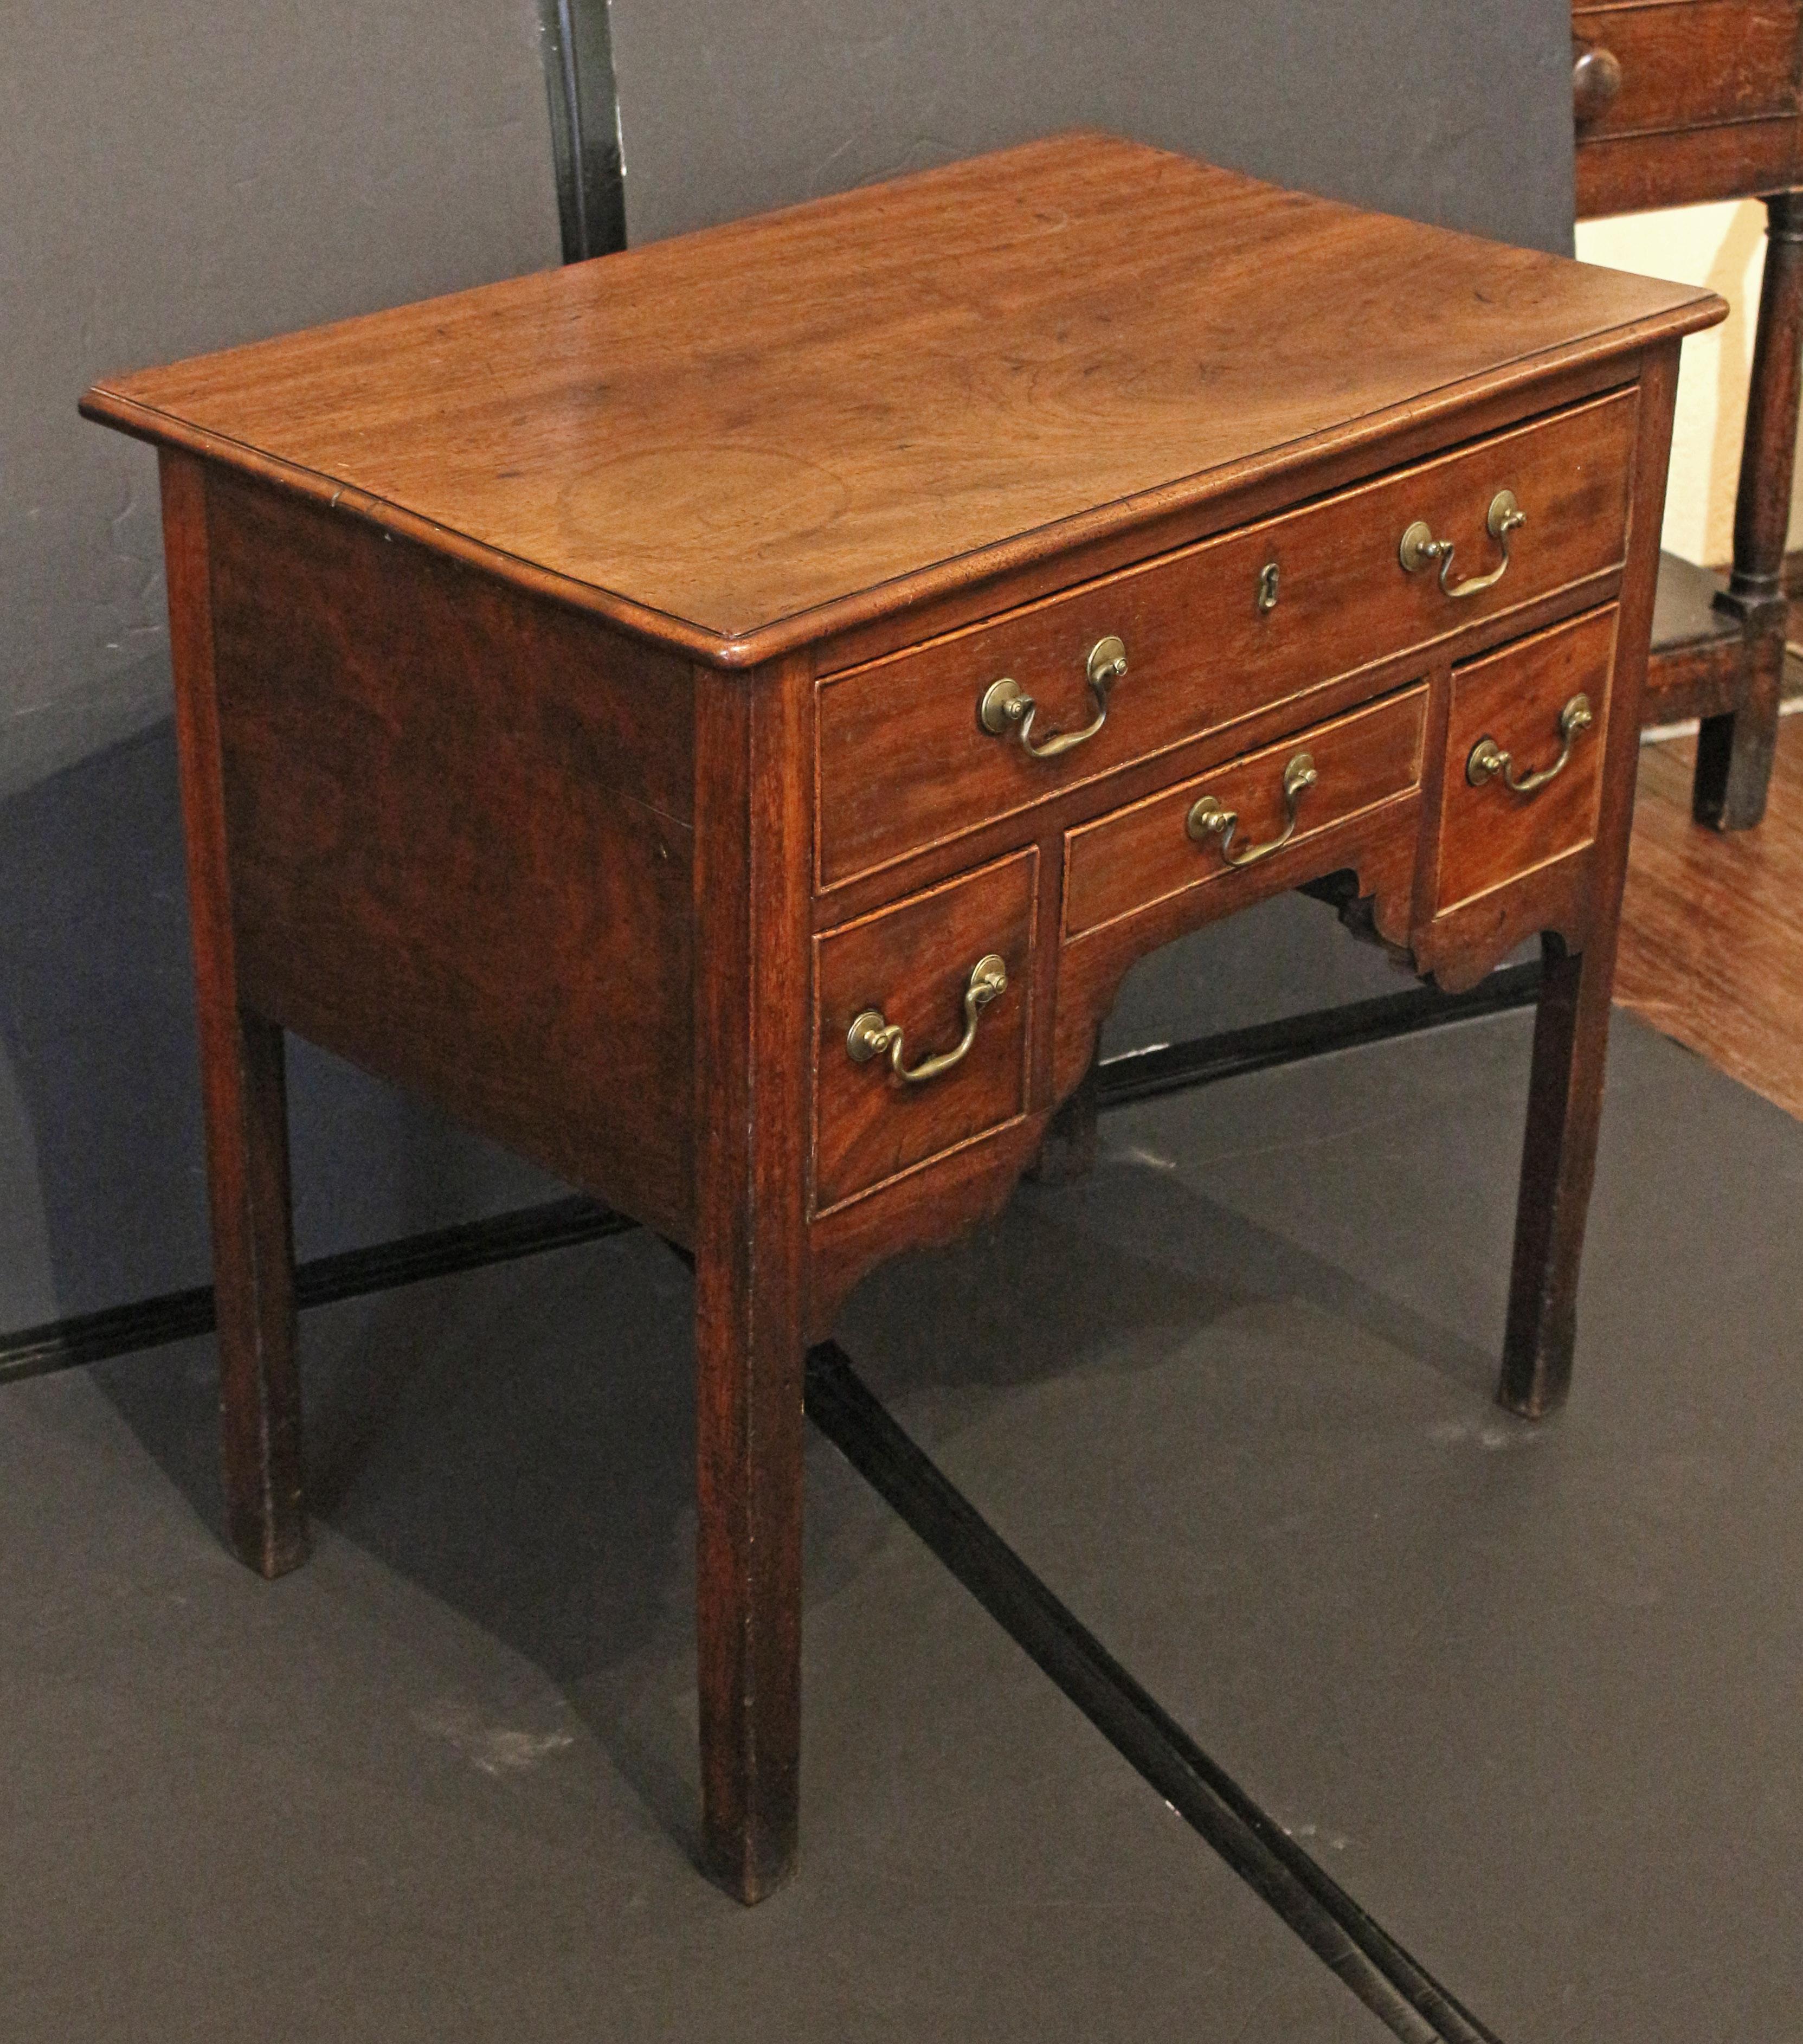 Circa 1760-80 George III period lowboy table, English. Well figured mahogany. One long drawer over central petite rectangular drawer flanked by square drawers, over very nicely shaped aprons. Raised on square legs, the feet tipped due to wear over